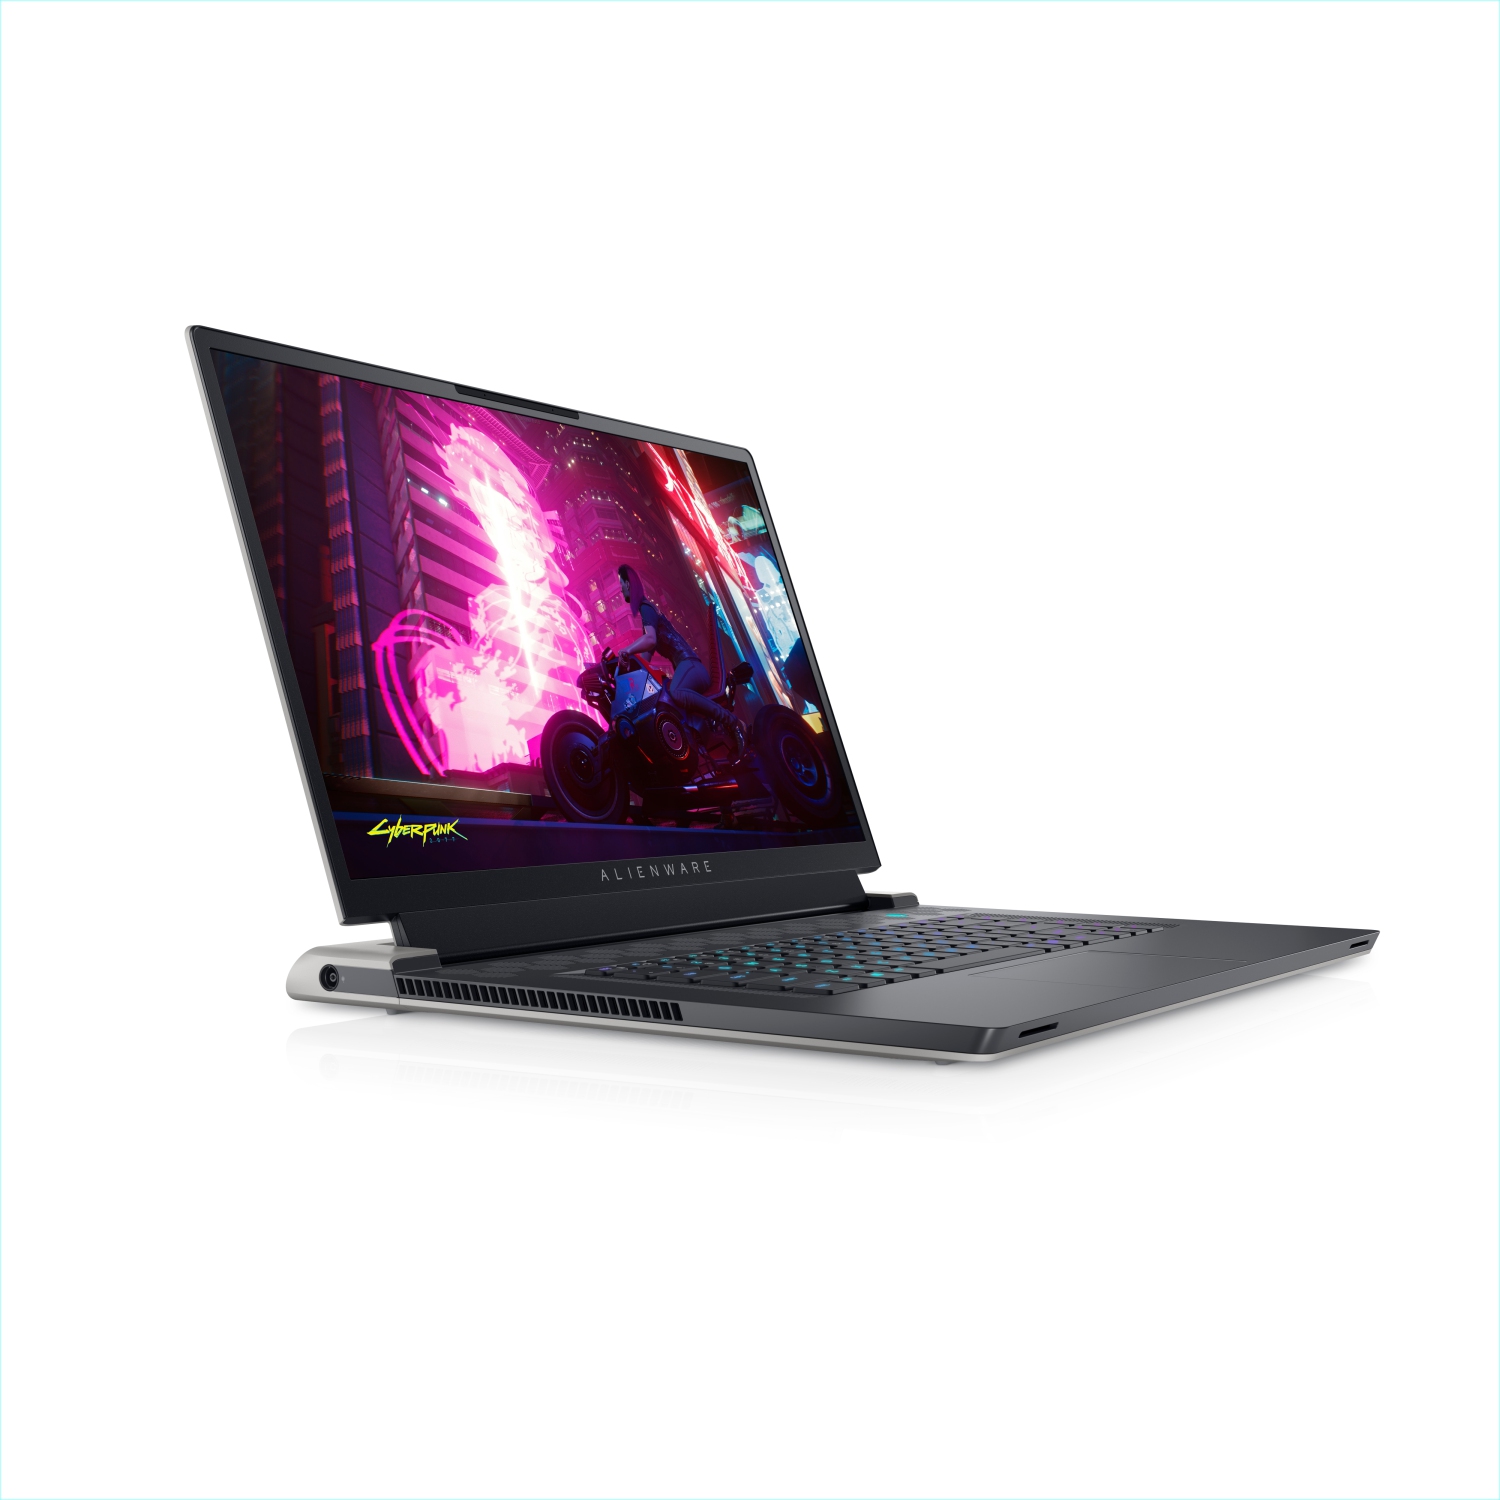 Refurbished (Excellent) - Dell Alienware X17 R1 Gaming Laptop (2021), 17.3" 4K, Core i7, 2TB SSD, 32GB RAM, RTX 3080, 8 Cores @ 4.6 GHz, 11th Gen CPU Certified